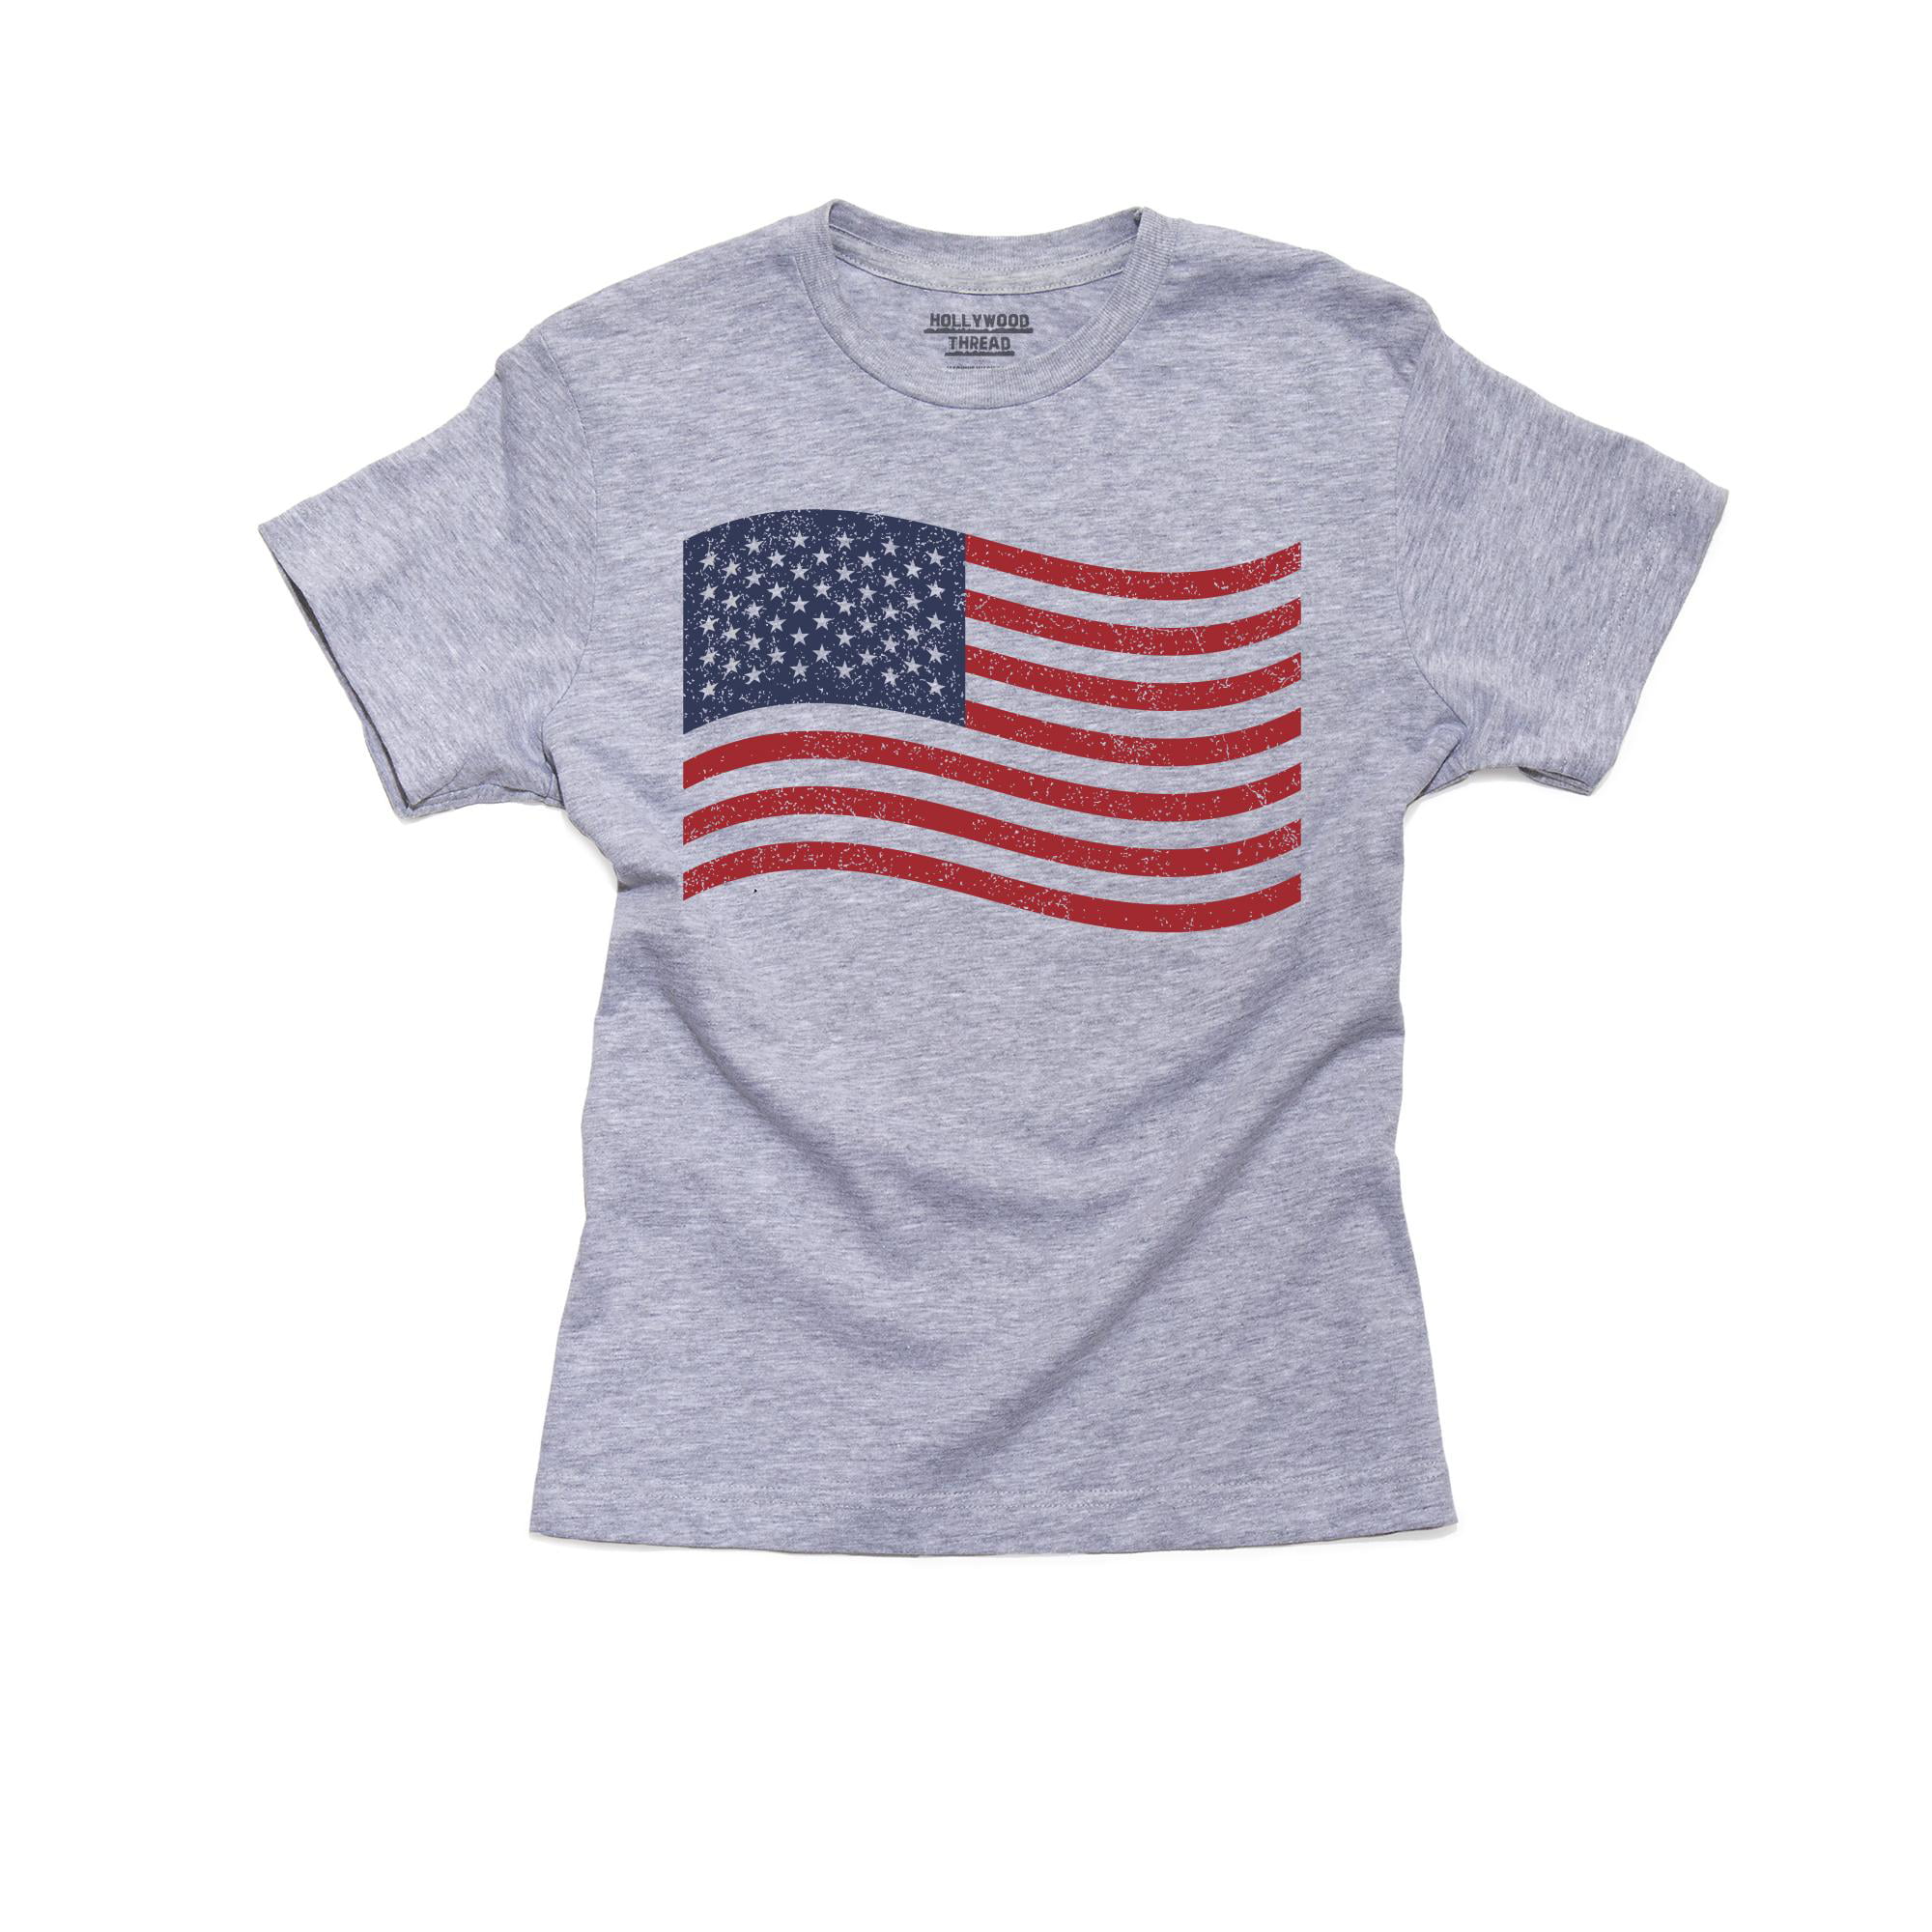 Youth 4th of July USA American Flag T-Shirt